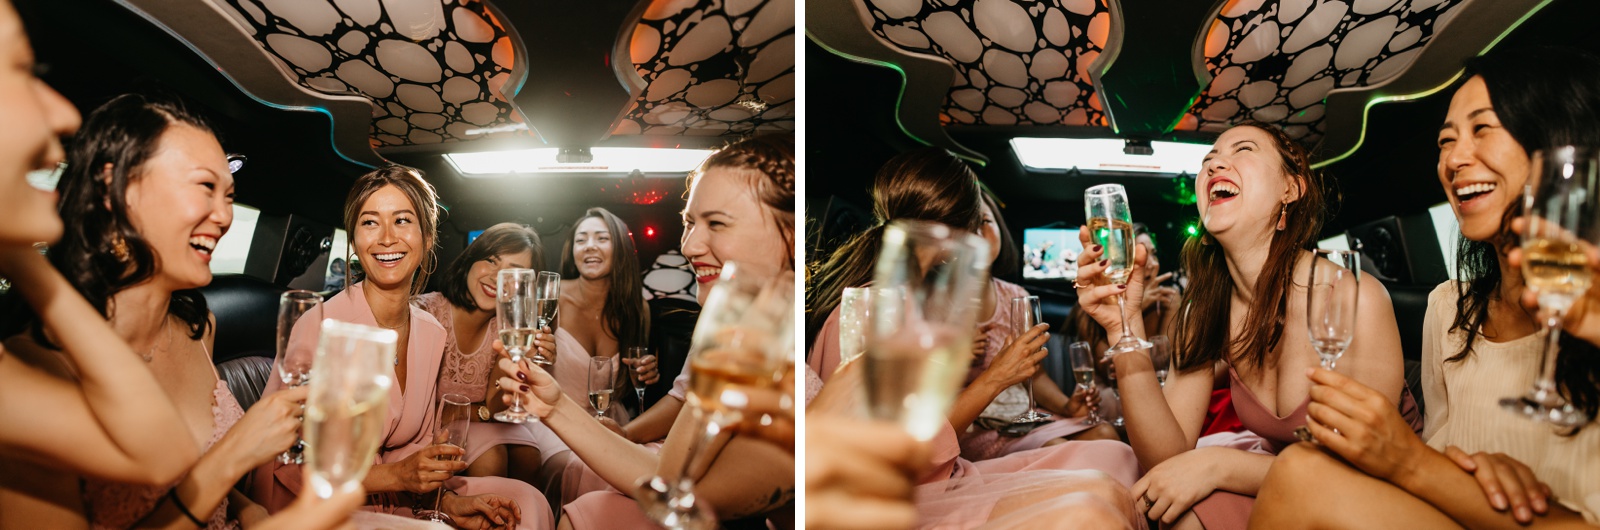 Champagne photos in limo with bridesmaids